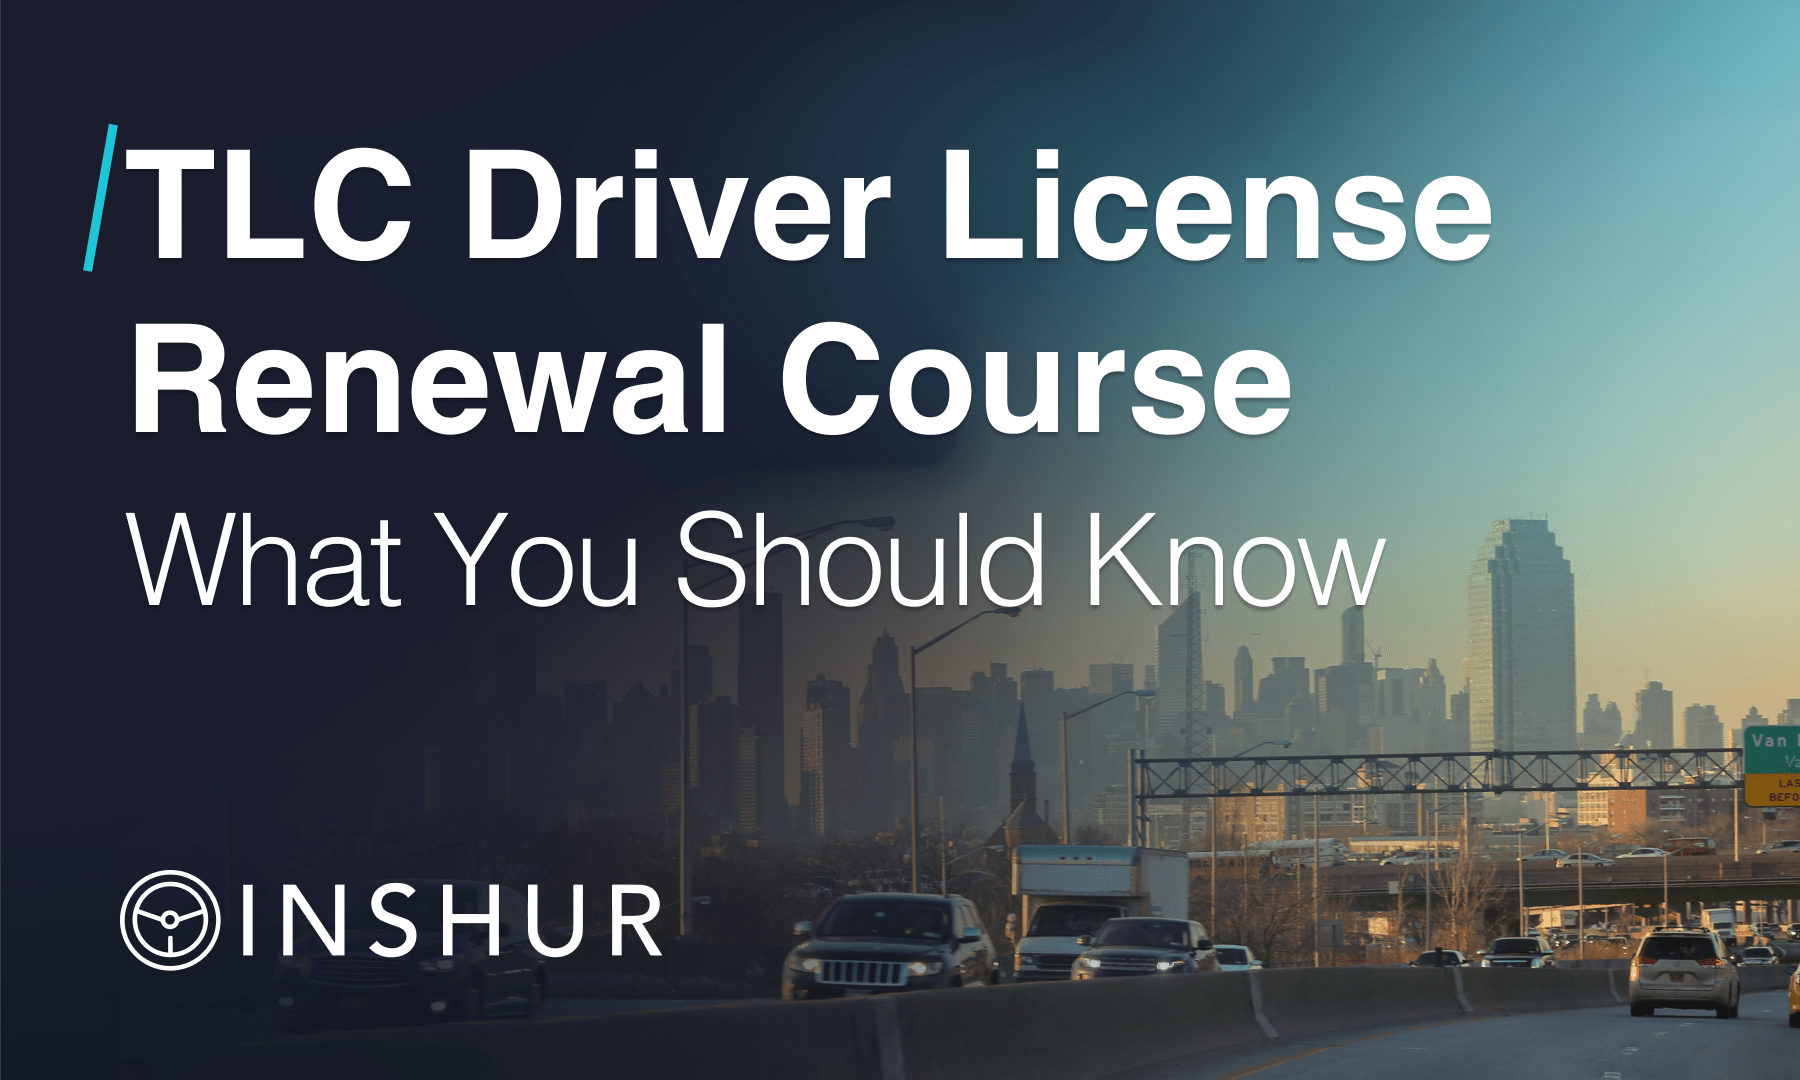 TLC License Renewal Course – What You Should Know